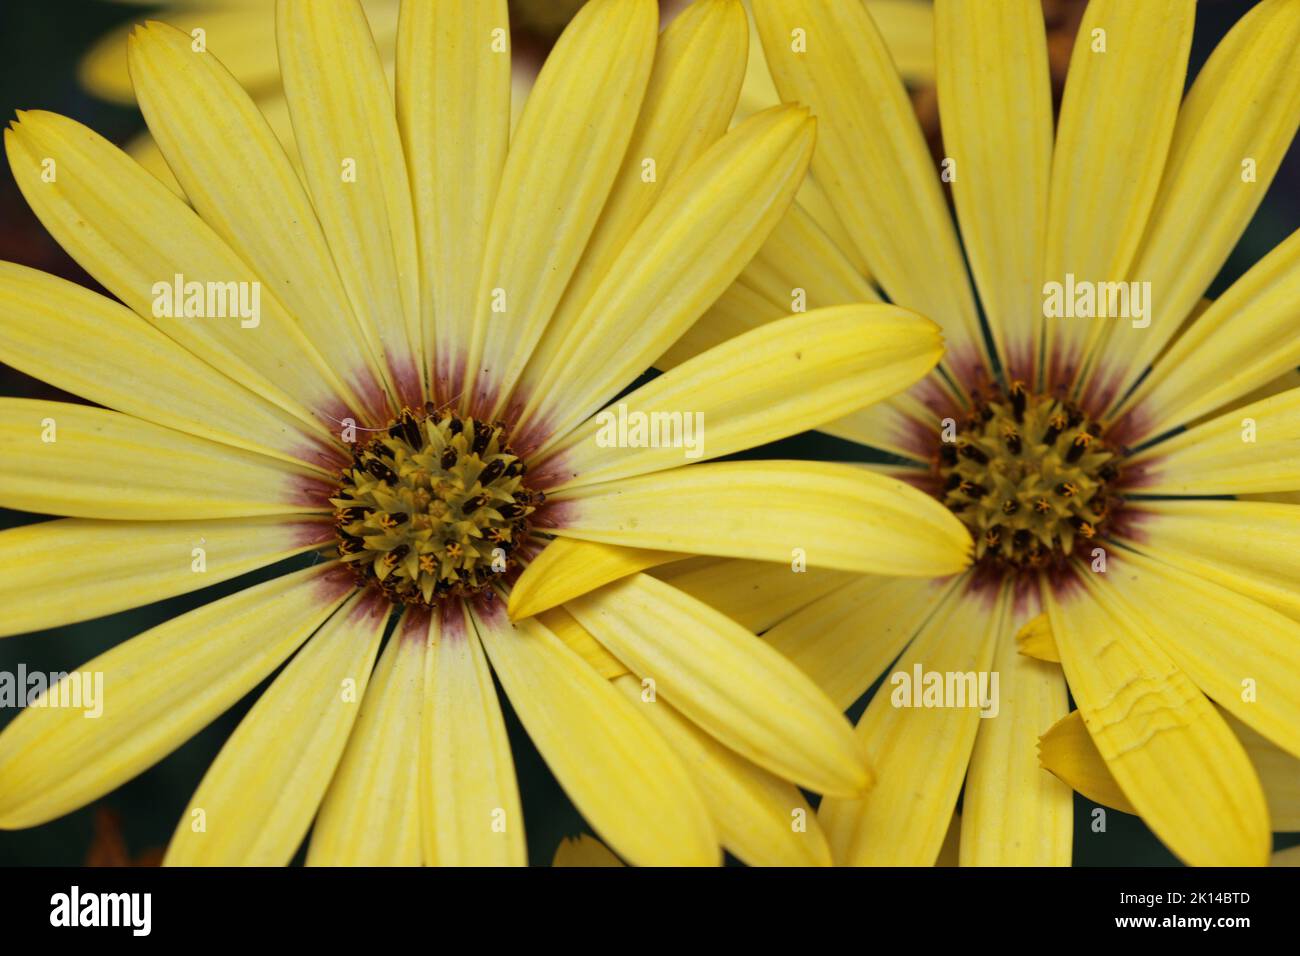 Yellow African daisy, Osteospermum unknown species and variety, flowers with a background of blurred flowers and leaves. Stock Photo